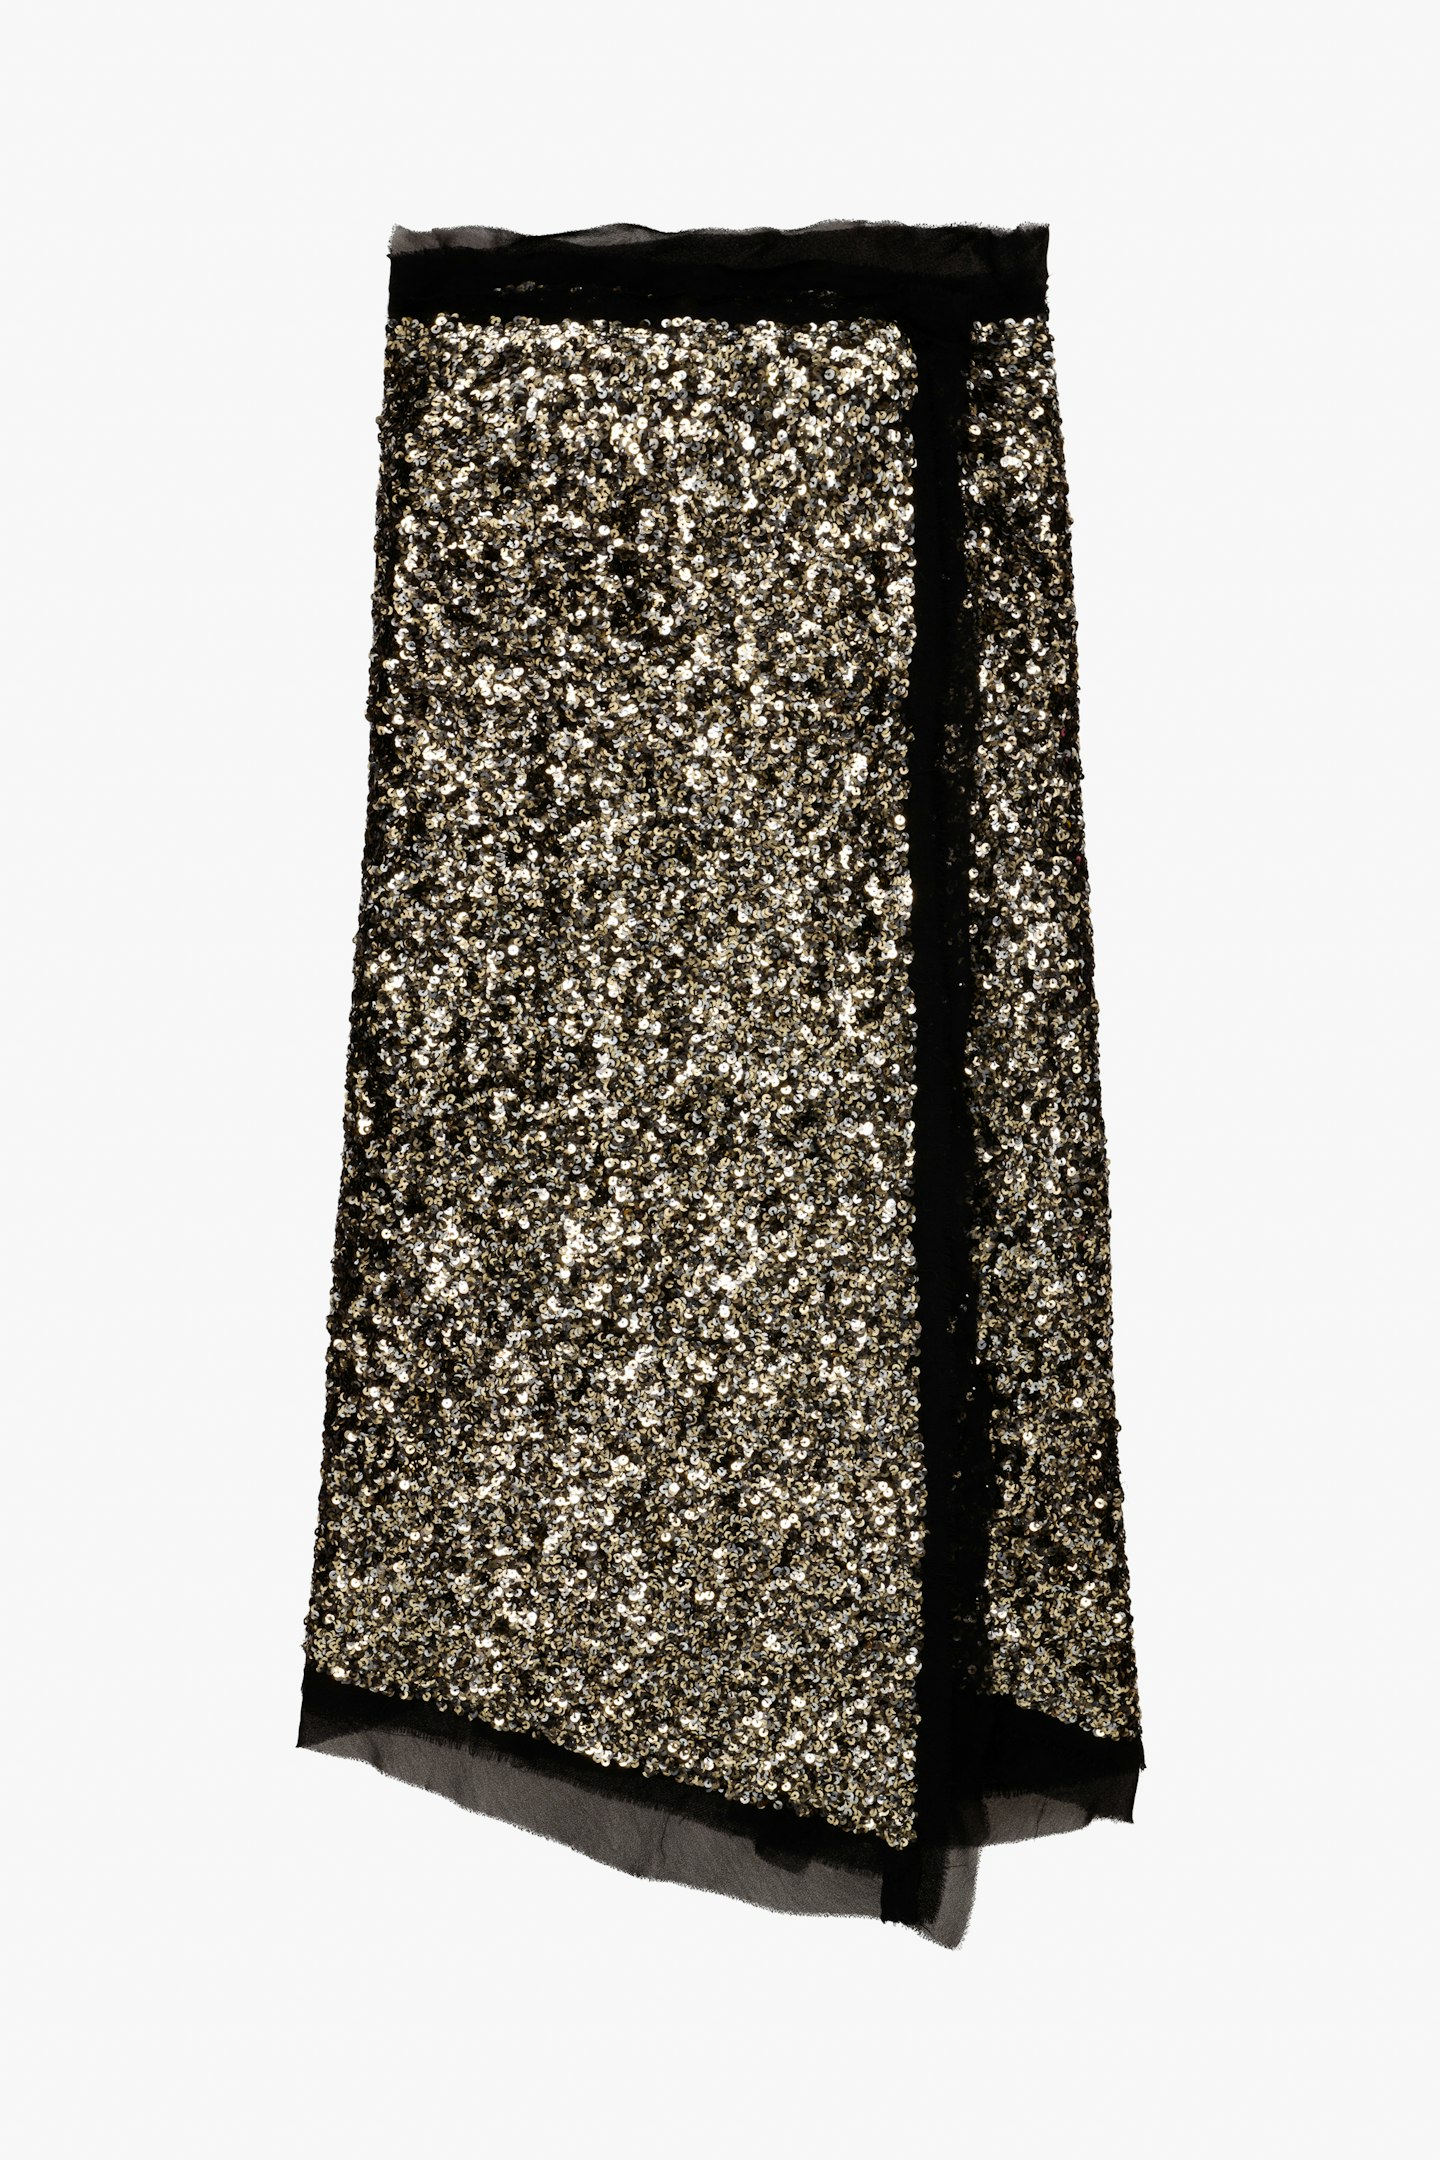 Limited Edition Sequin Skirt, £79.99